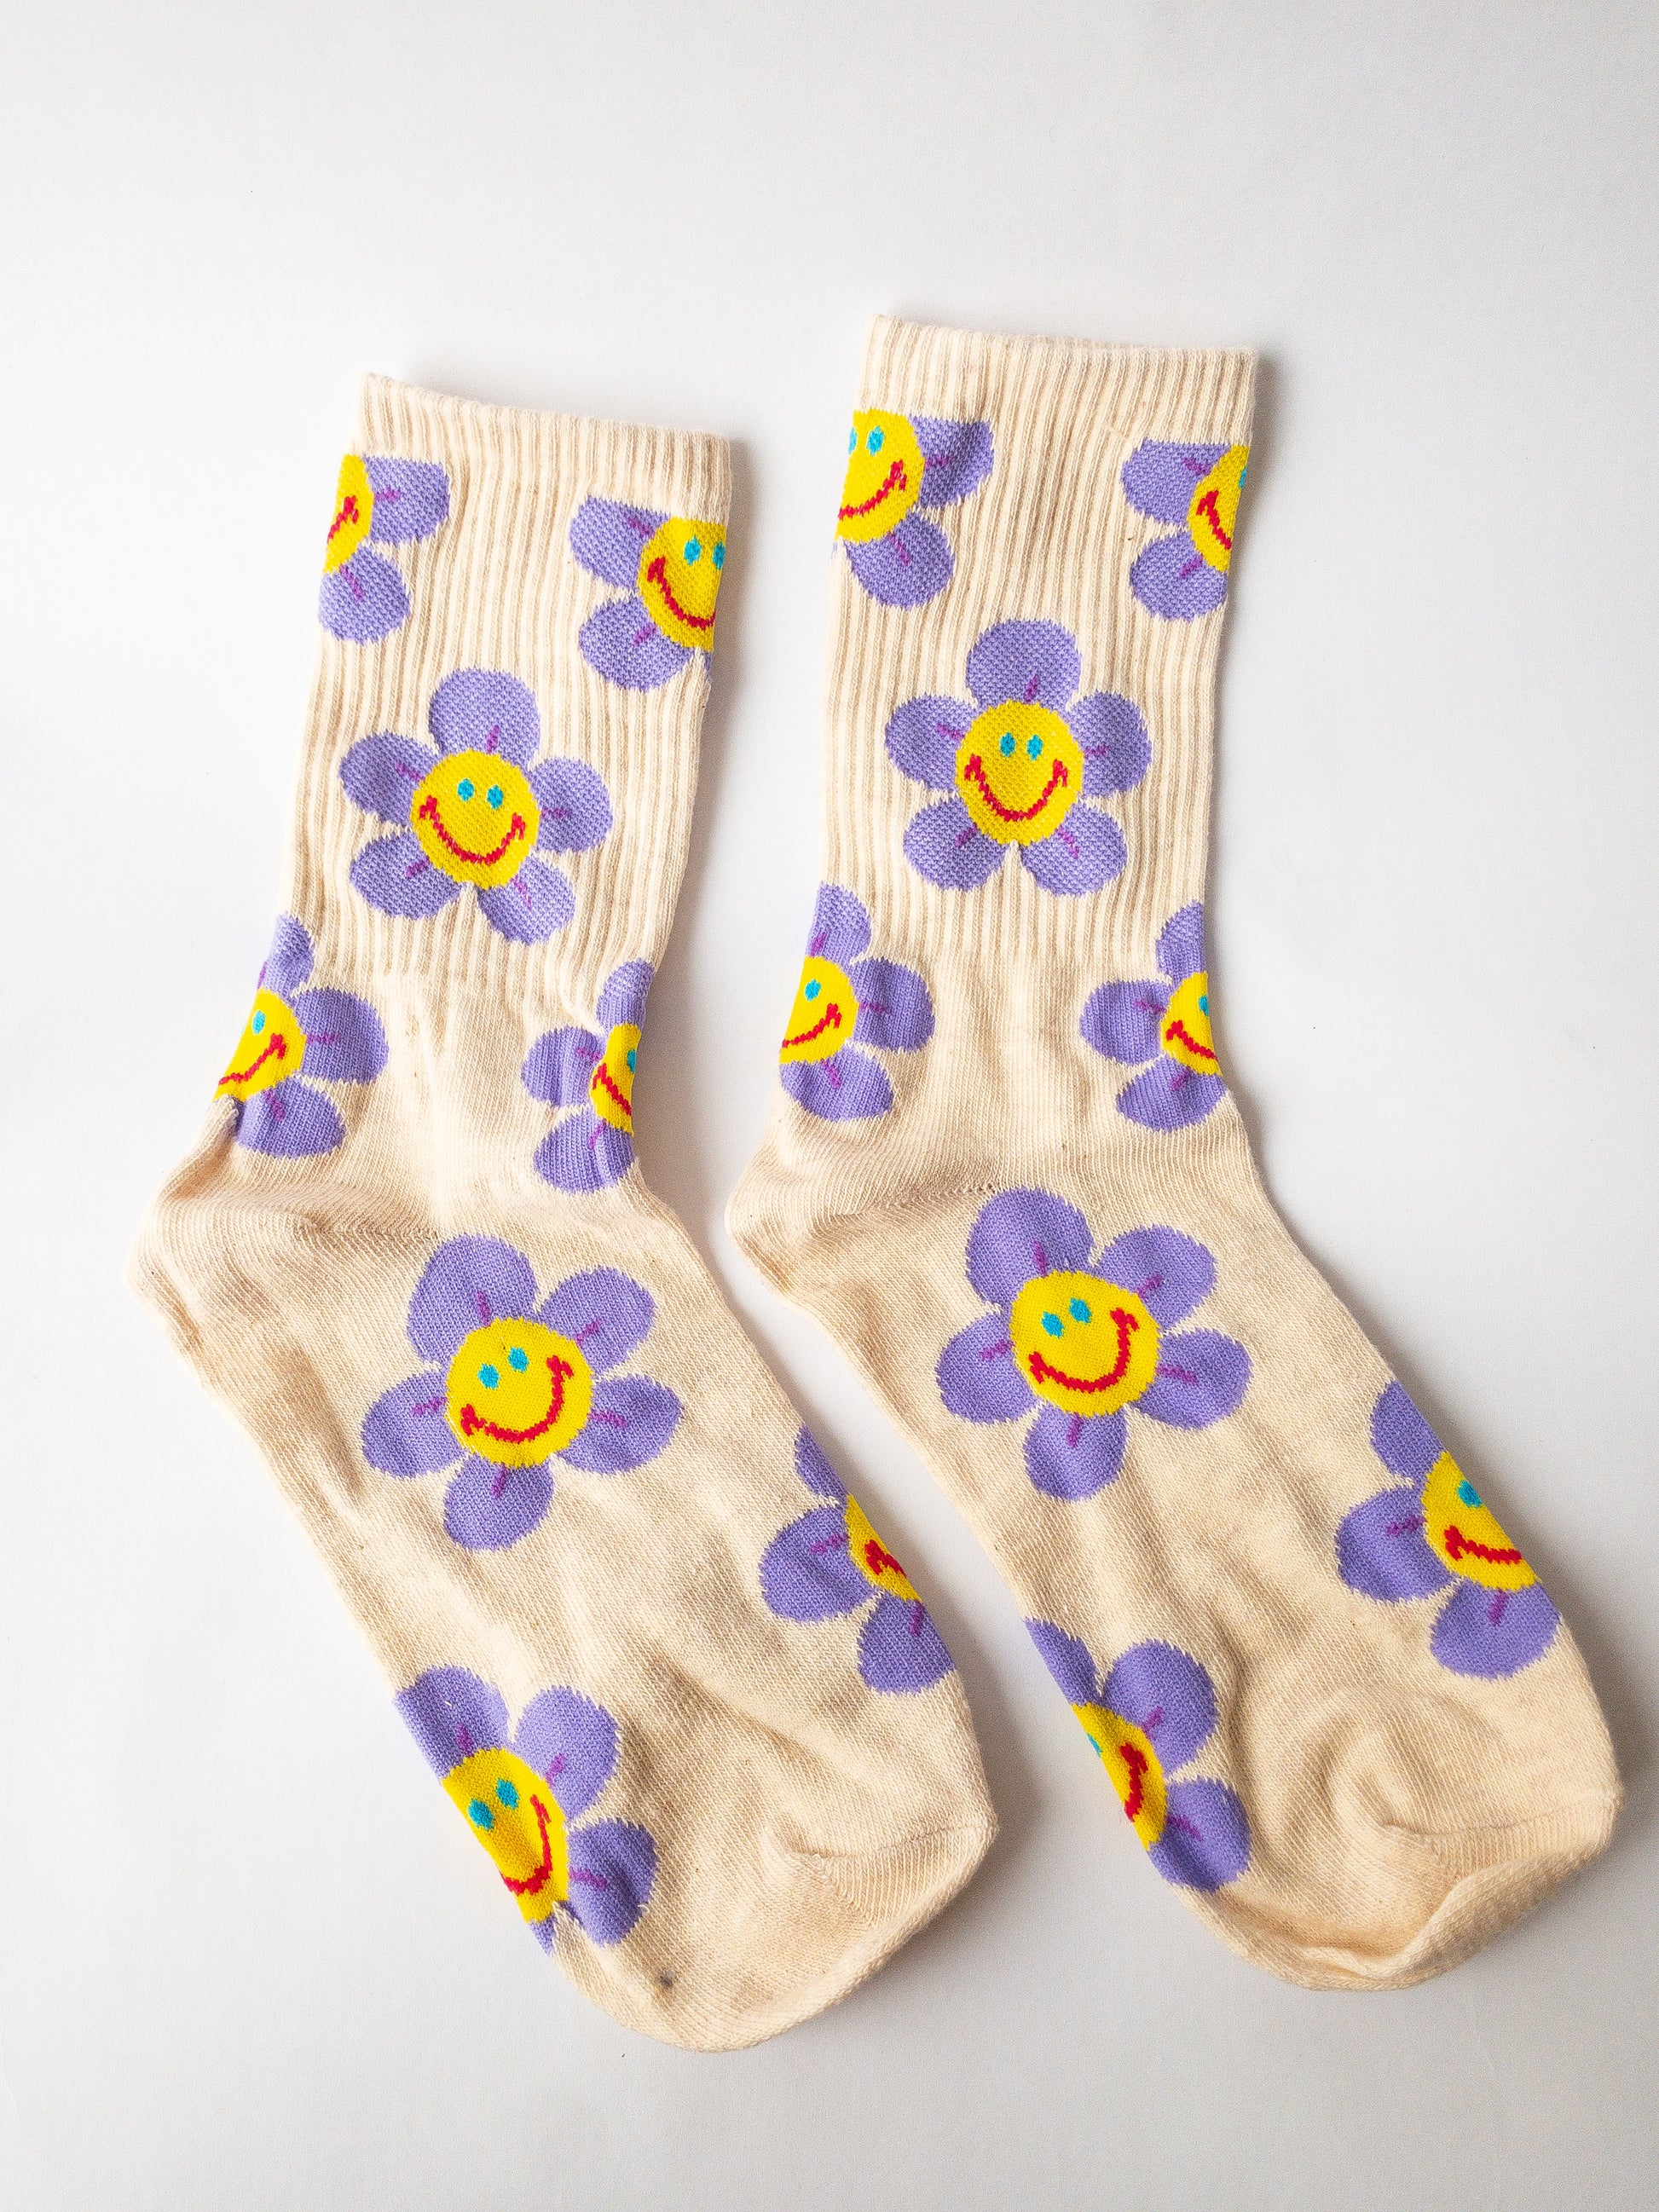 Groovy, happy and cute! Two pairs of crew length socks in this set with one pair being light purple with bright pink smiley flowers and the other being a cream color with purple smiley flowers.  Adult size 4-10, crew socks length.